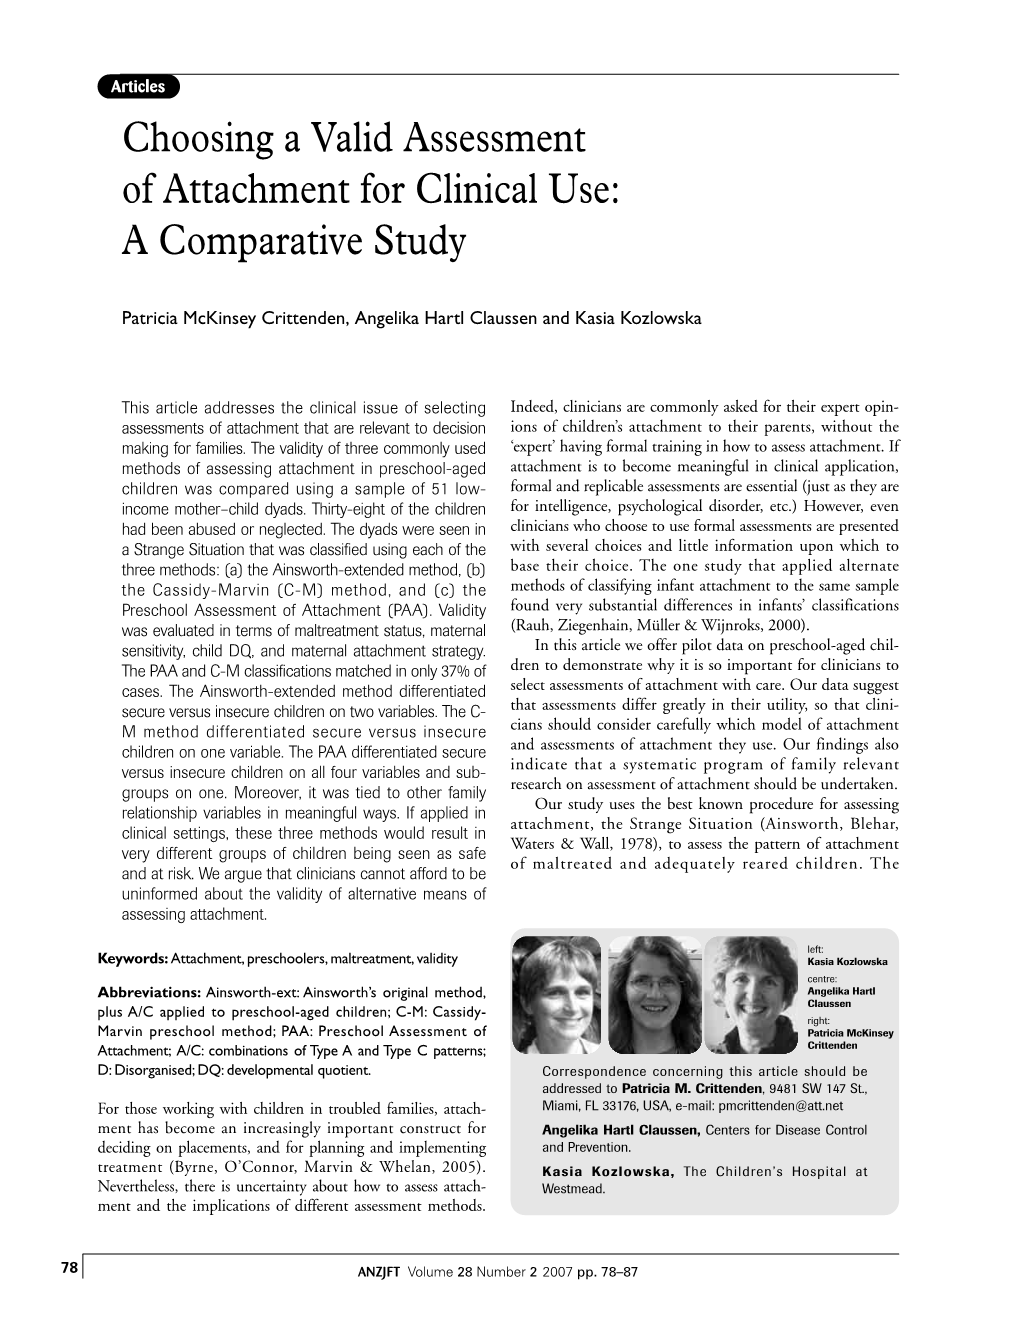 Choosing a Valid Assessment of Attachment for Clinical Use: a Comparative Study